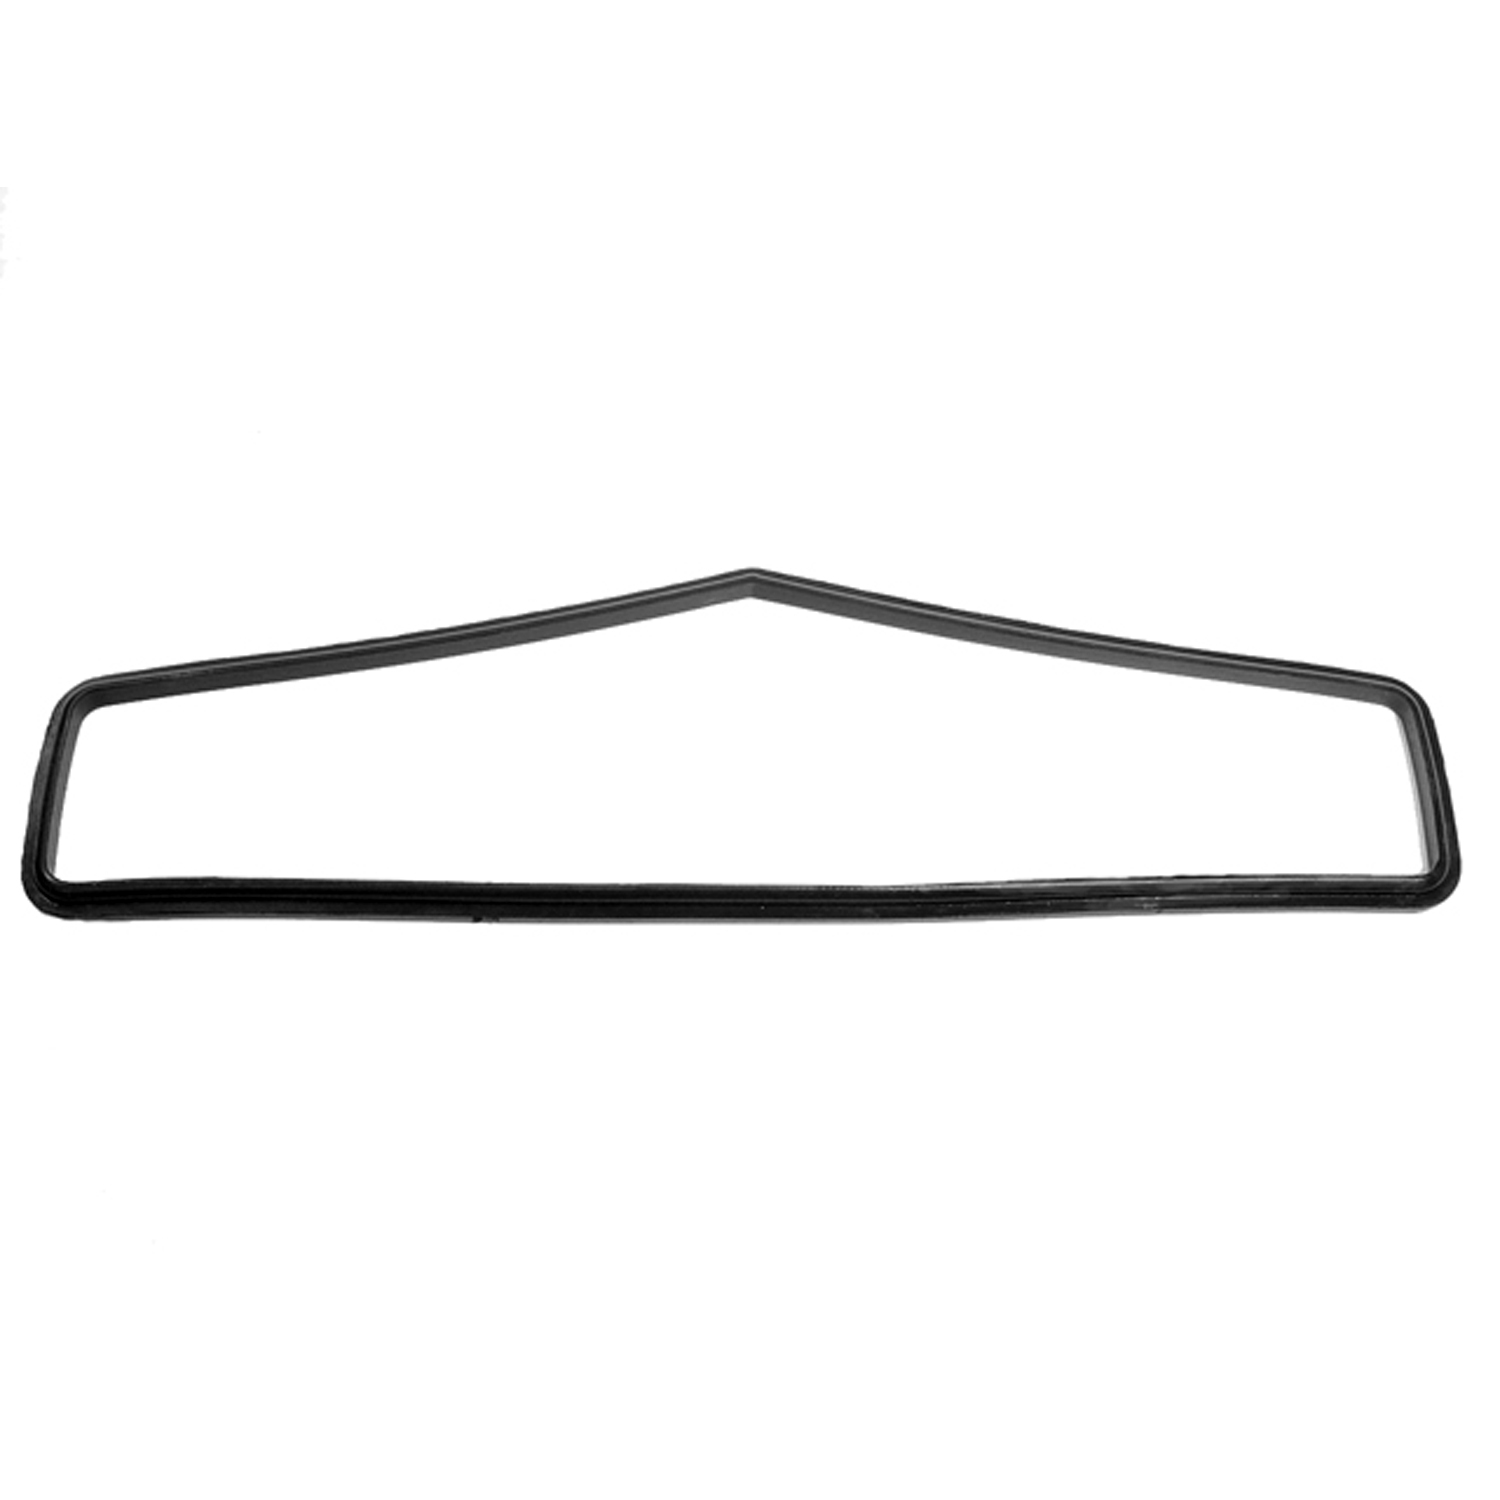 1954 Chevrolet Truck Cowl Vent Seal.  NOT for models with flat-faced cowls-RP 100-N